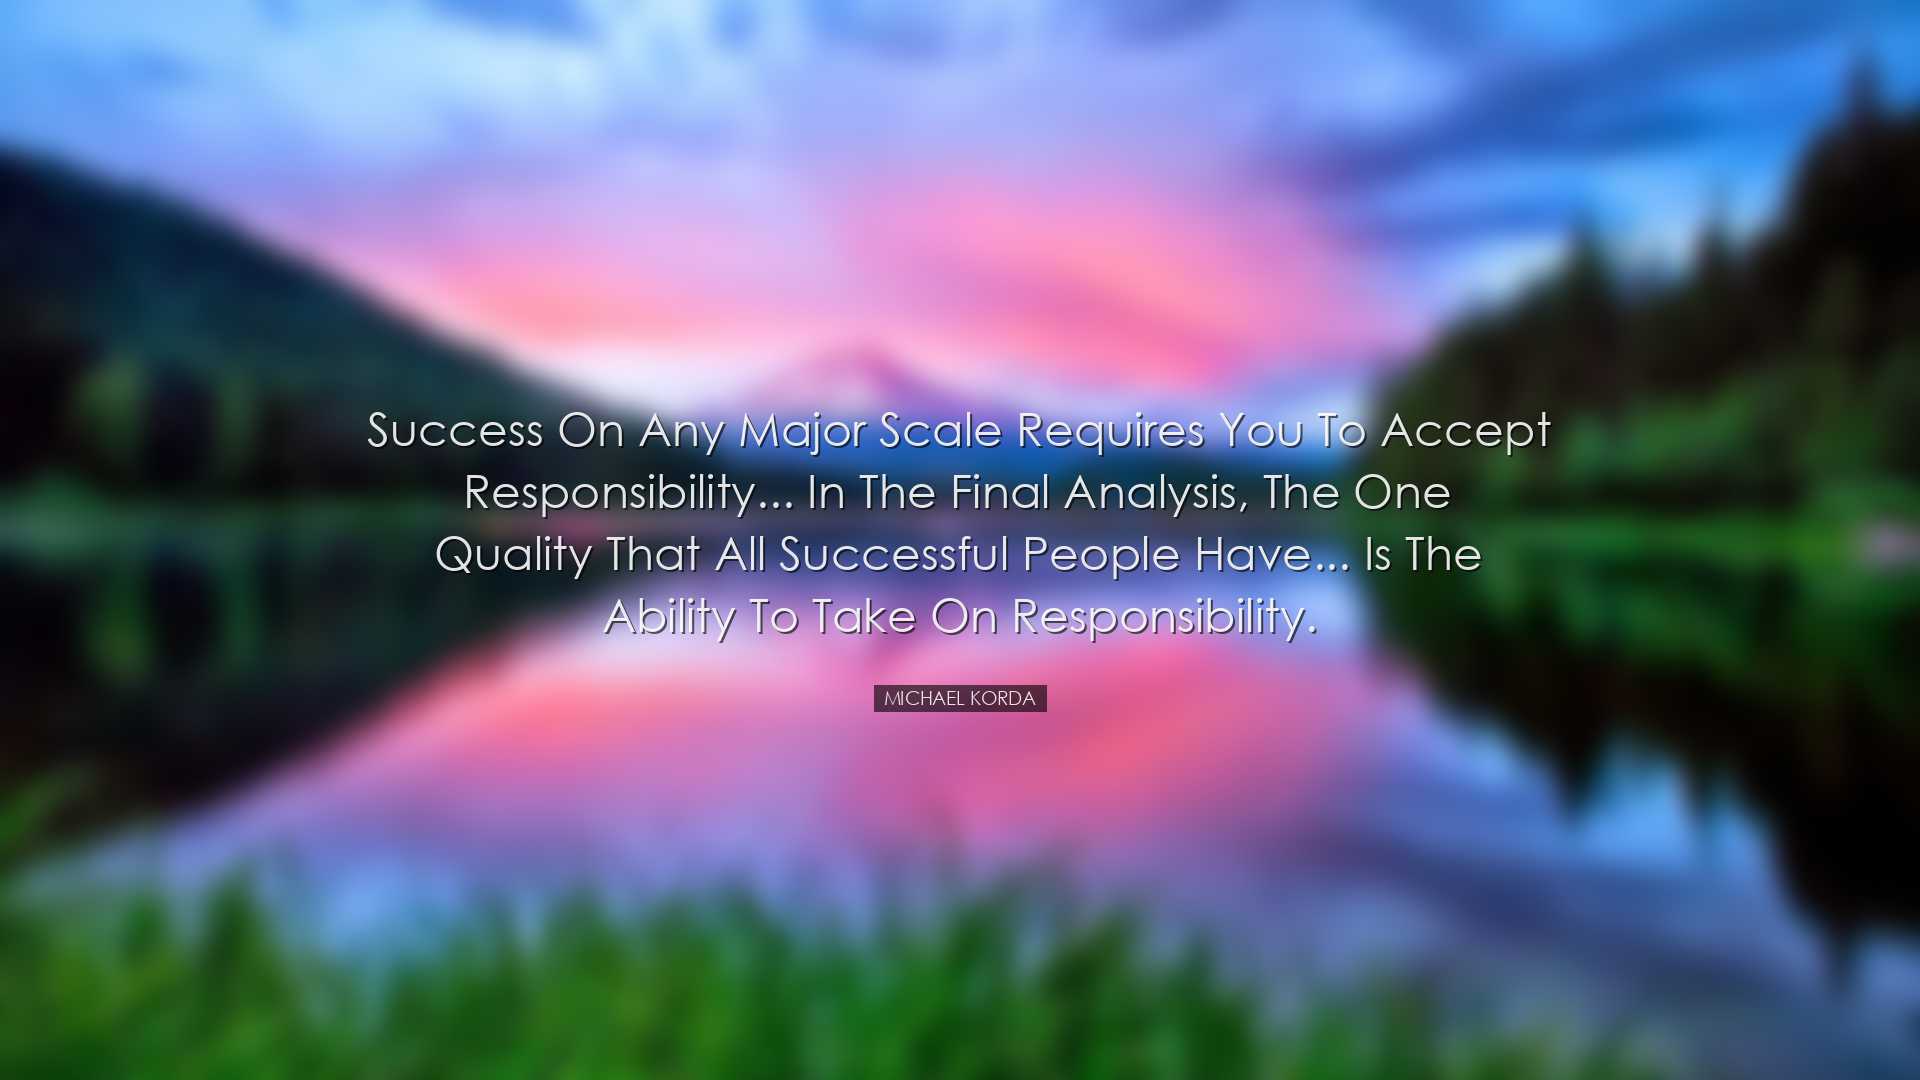 Success on any major scale requires you to accept responsibility..